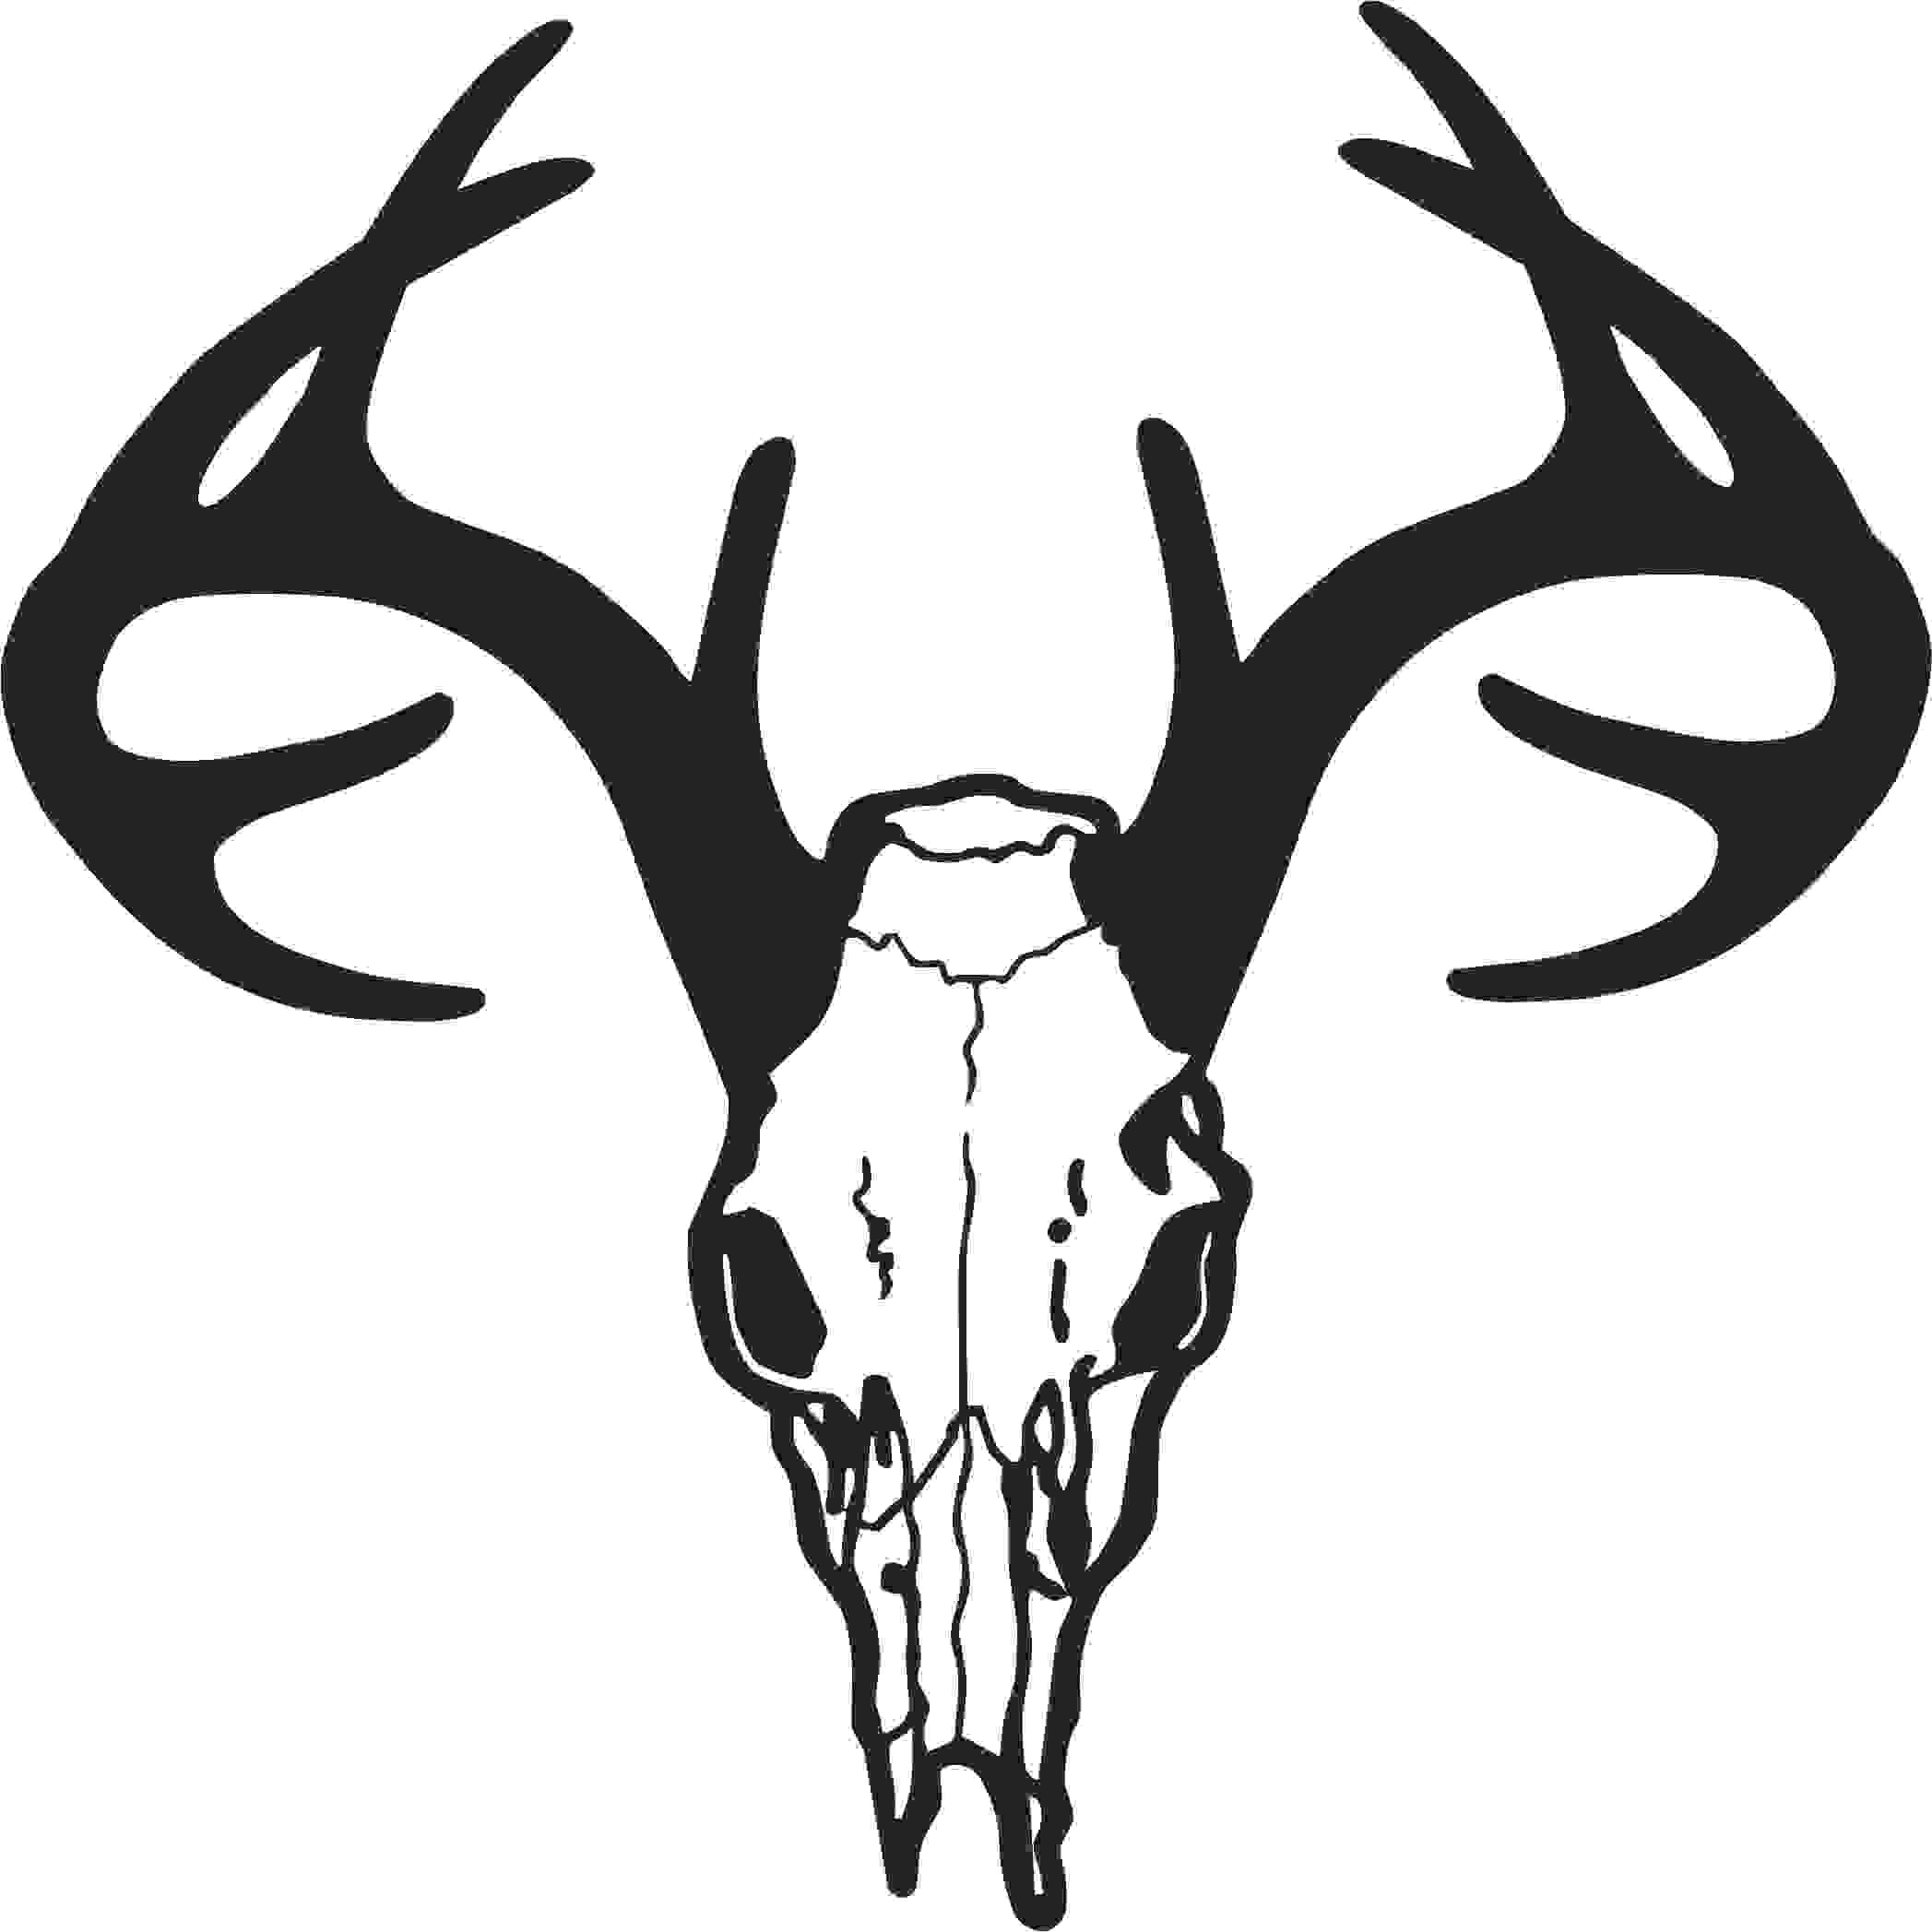 this is best deer skull clip art 14201 deer skull drawing free clipart images for your project or presentation to use for personal or commersial